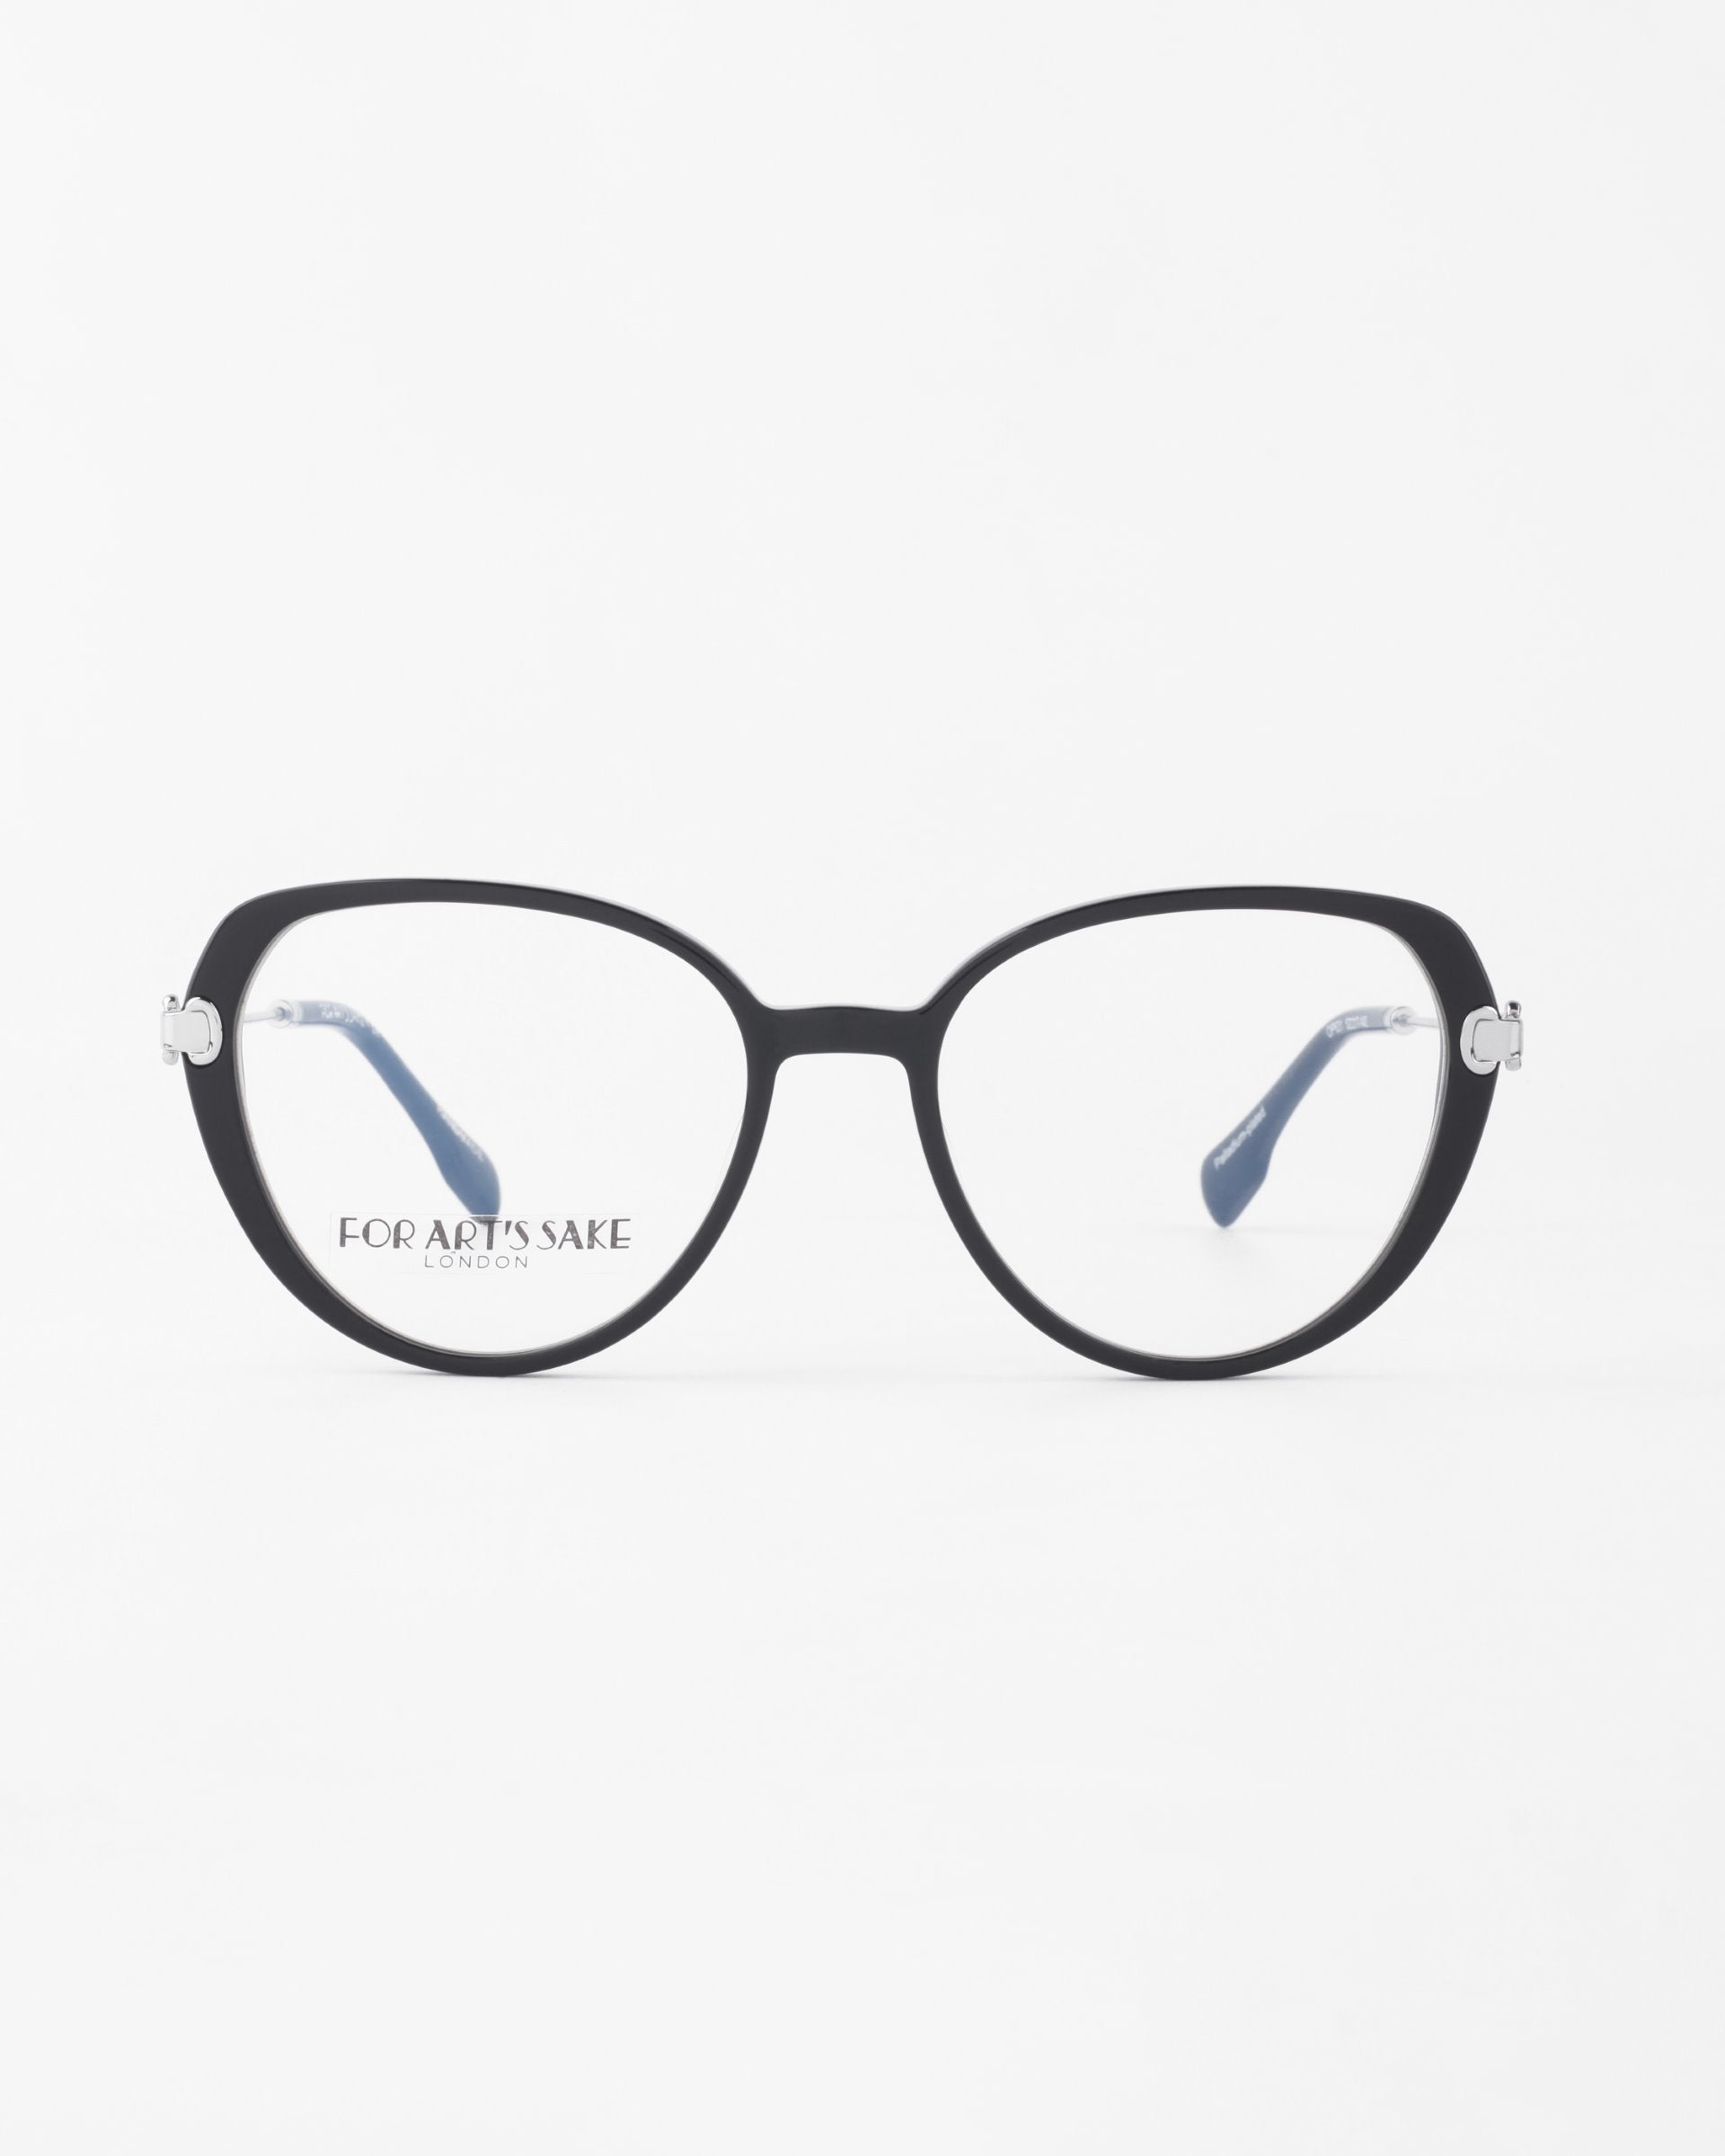 A pair of black-rimmed eyeglasses with a slightly rounded cat-eye shape, featuring the "For Art's Sake®" logo on the inside of the right lens. The frames have 18-karat gold-plated silver accents at the hinges, and the temples are navy blue with white tips. These eyeglasses are called Waterhouse by For Art's Sake®.